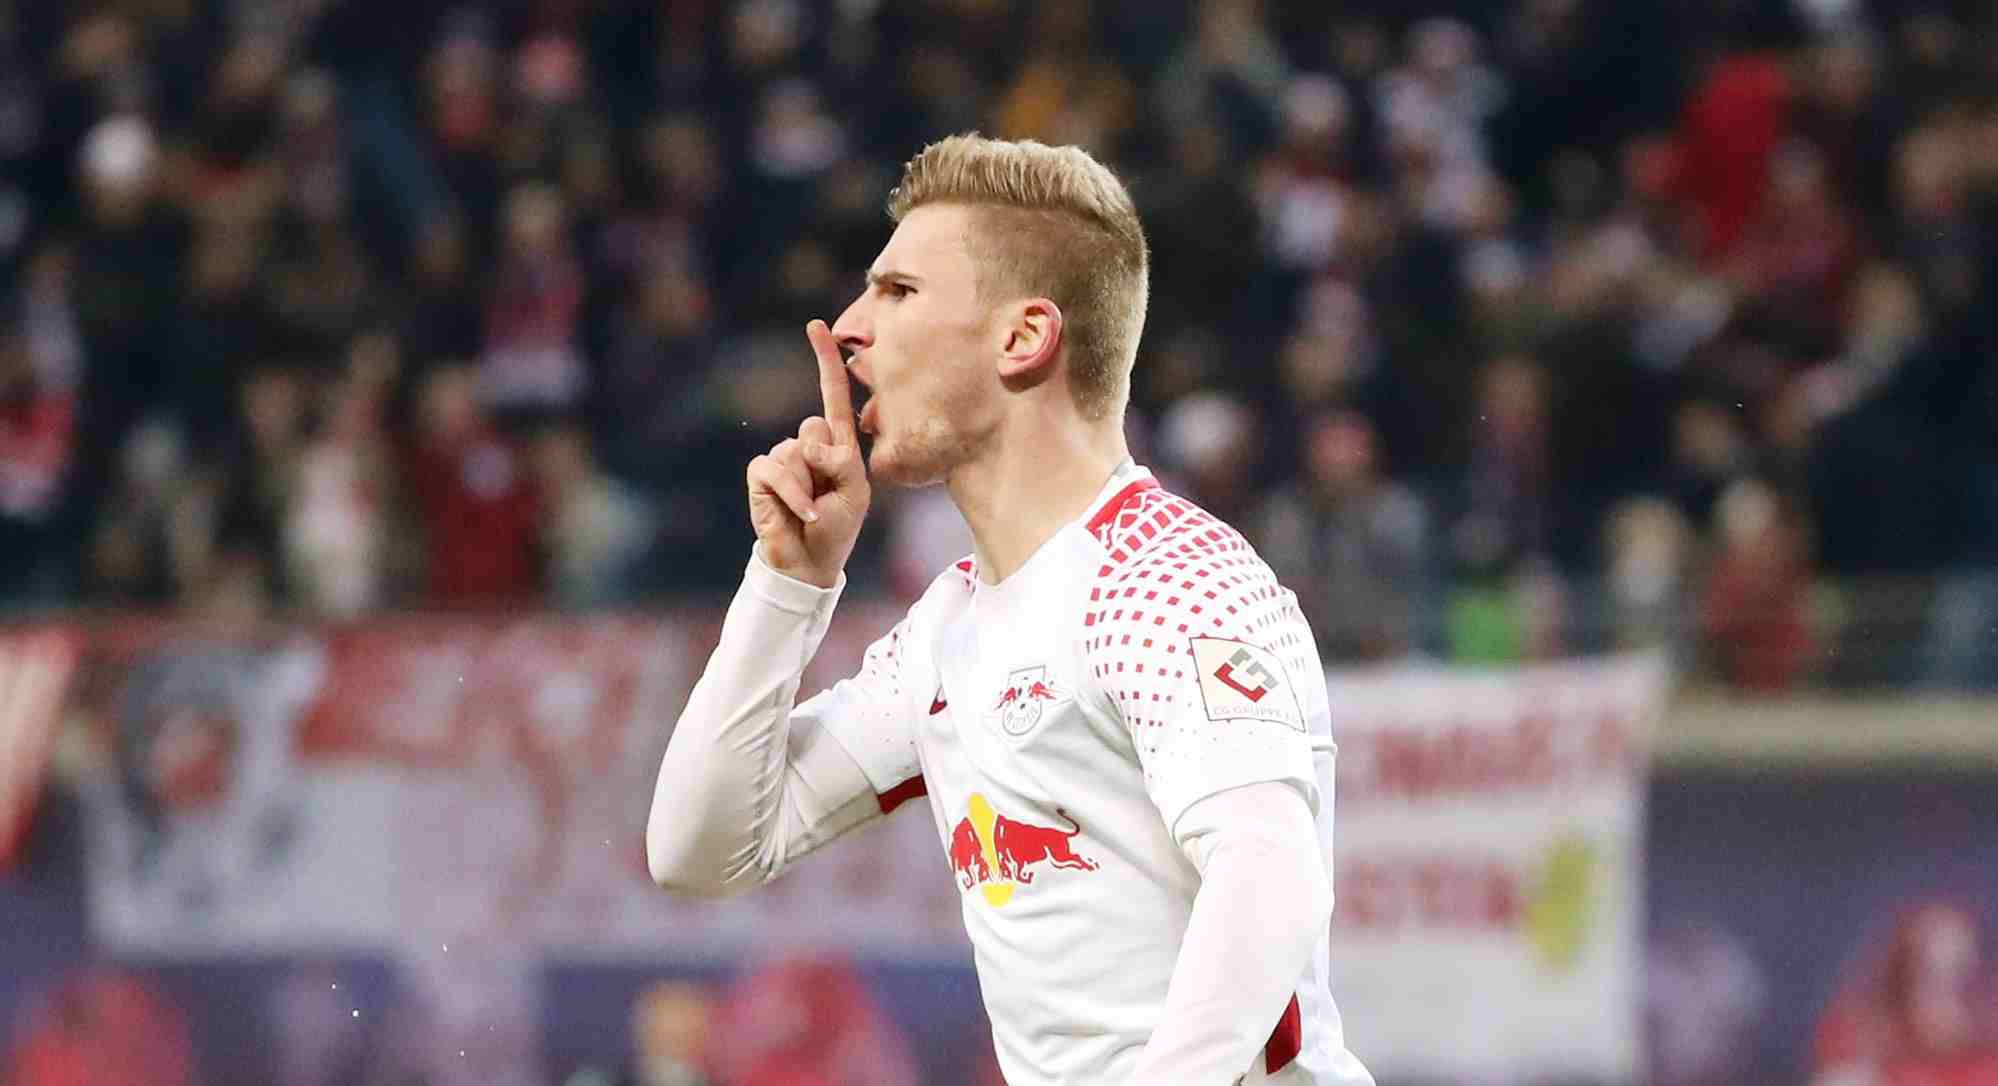 RB Leipzig deny Chelsea transfer agreement for Timo Werner